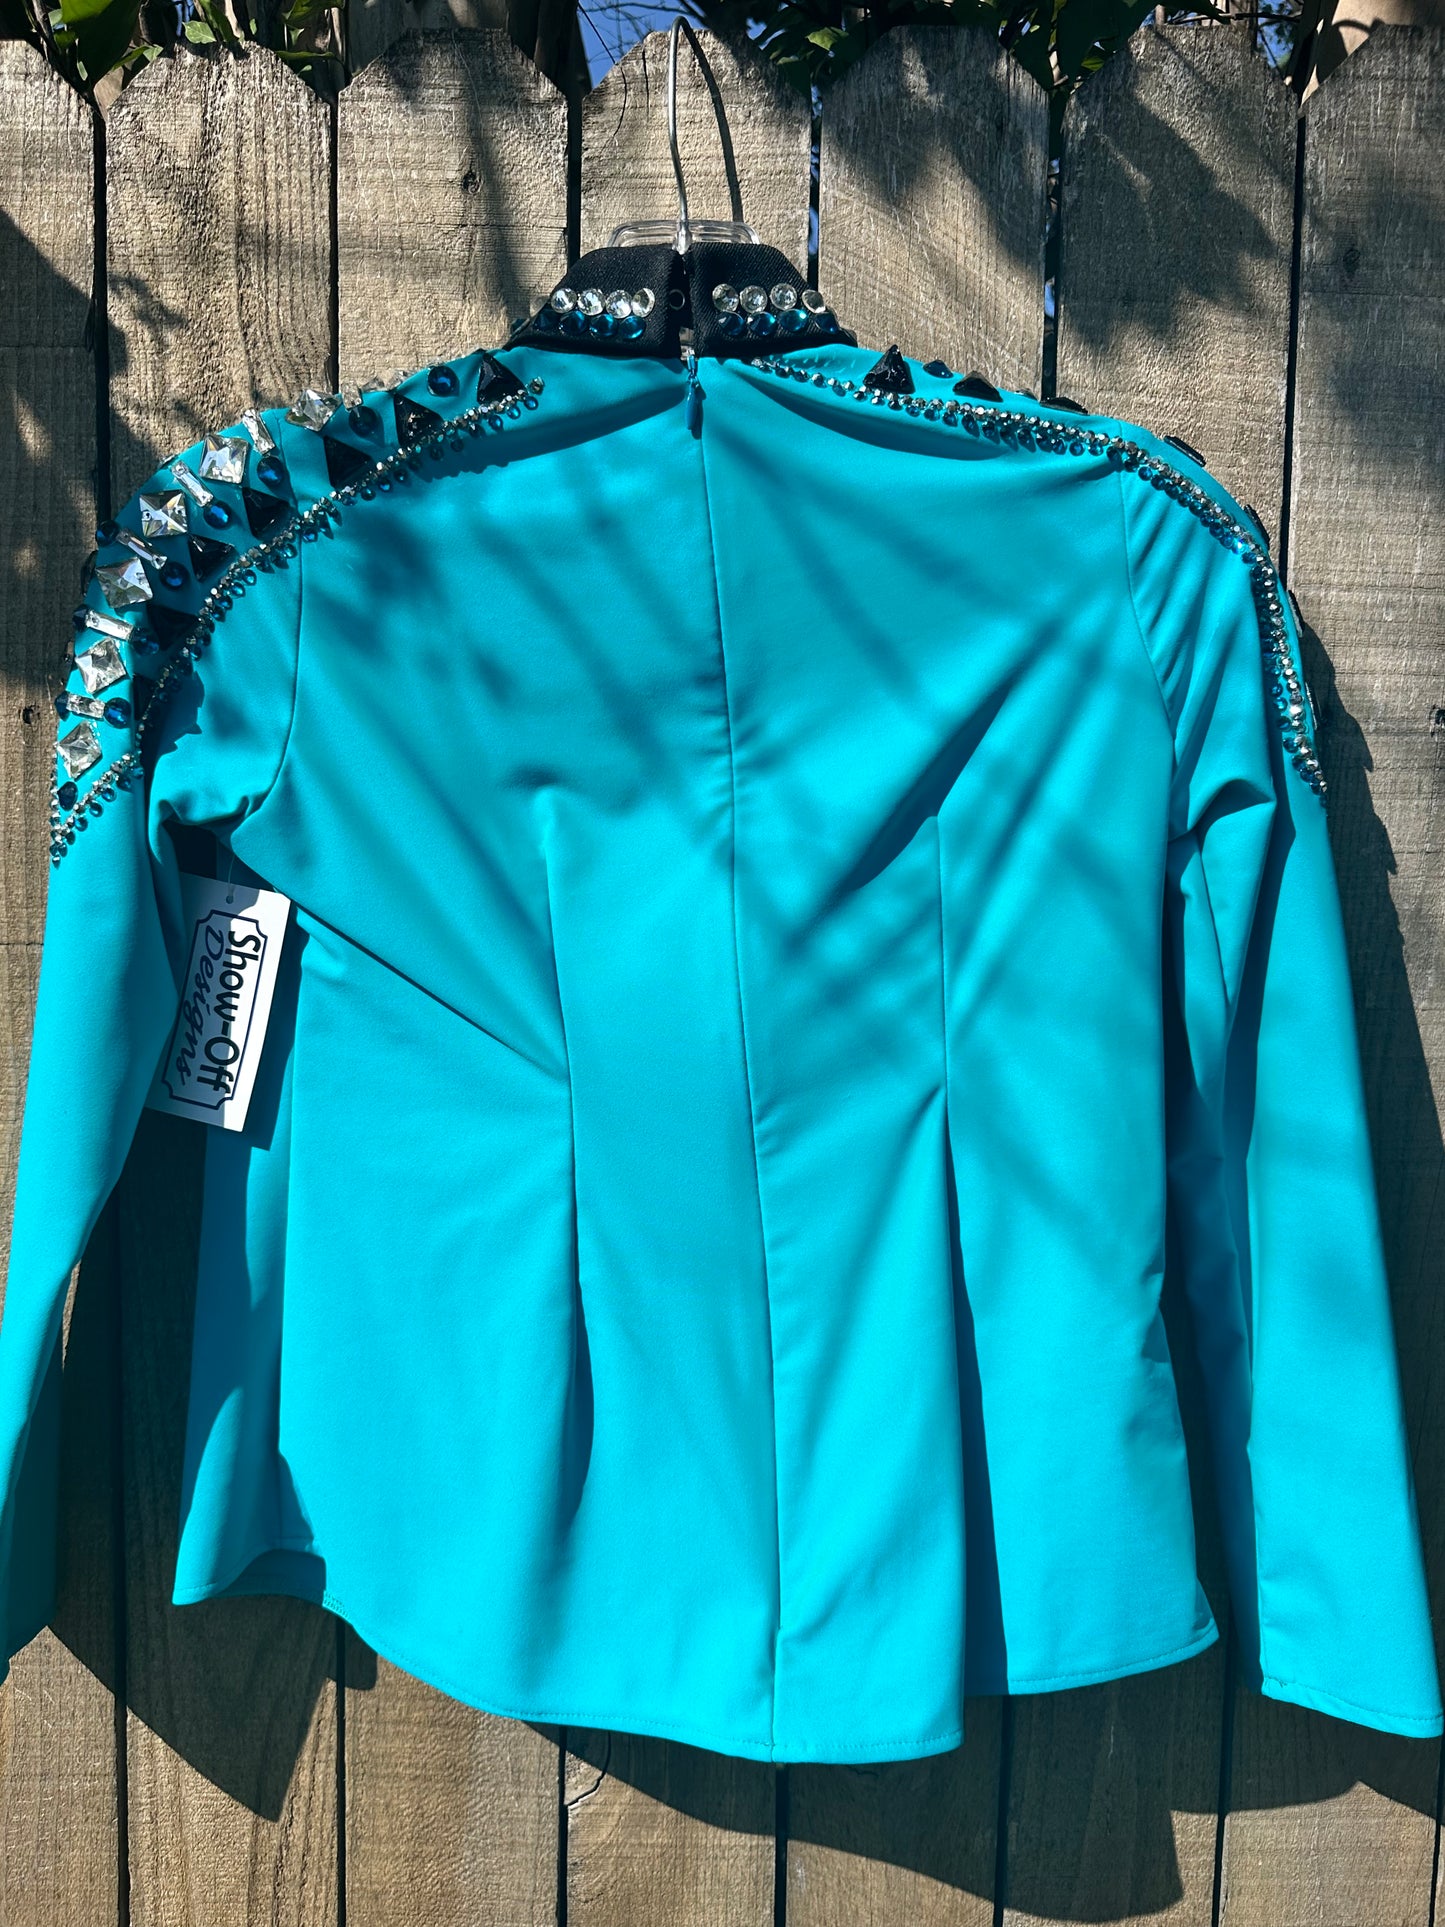 Kids size 10 day shirt back zip TONS OF STRETCH!